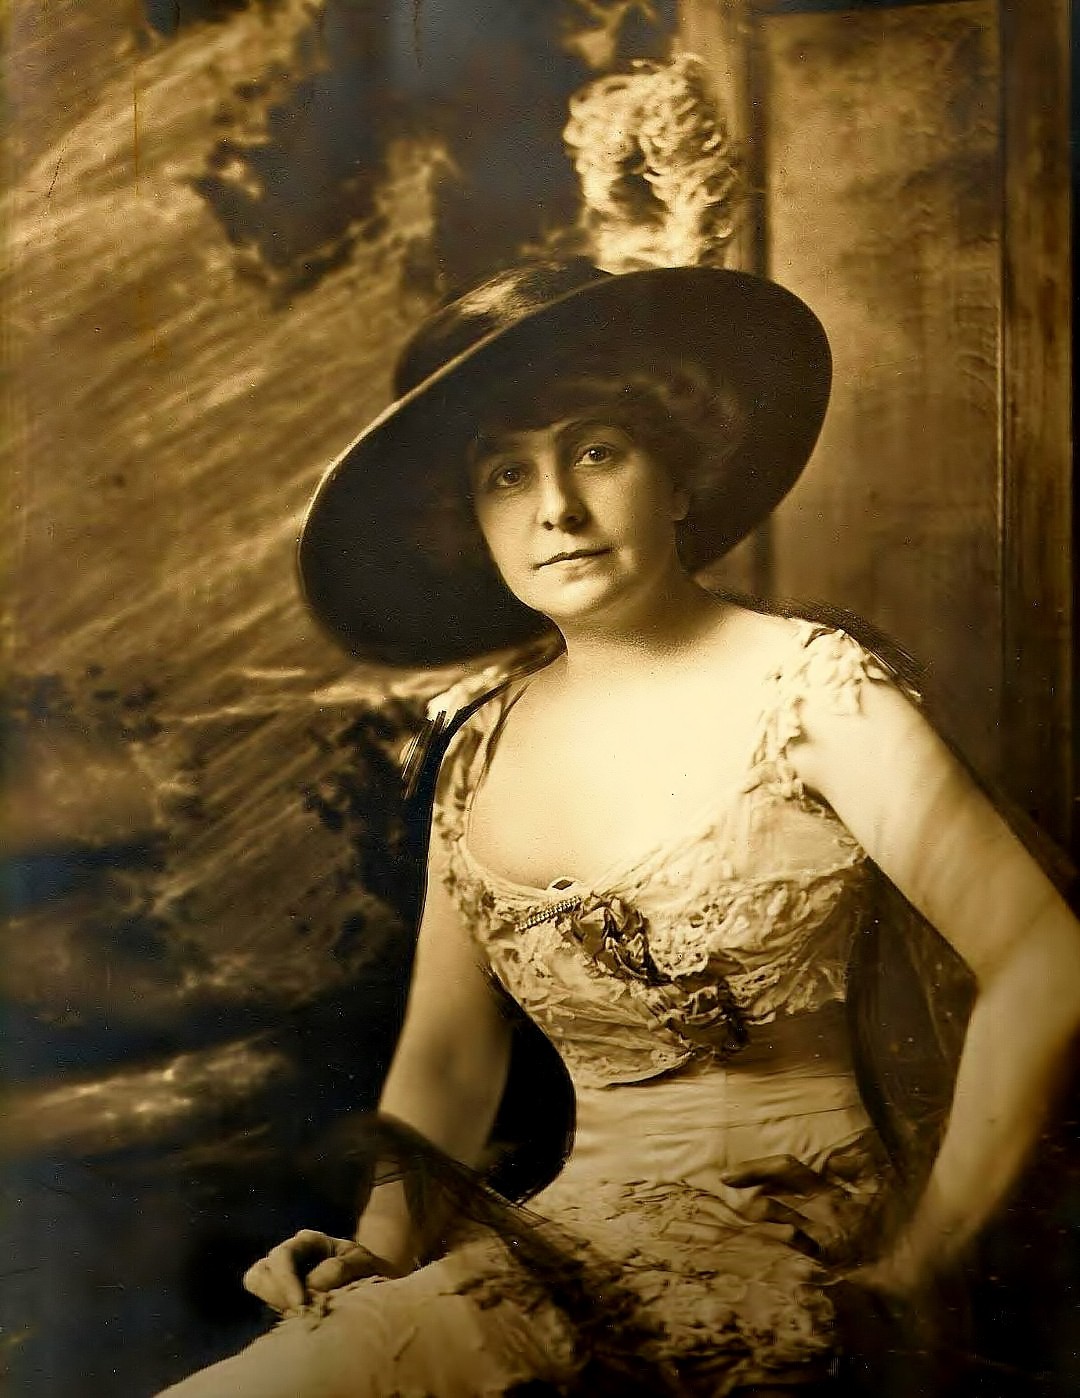 Cathrine Countiss; photograph by Strauss Peyton Photography Studio, Kansas City, 1913; courtesy of her estate